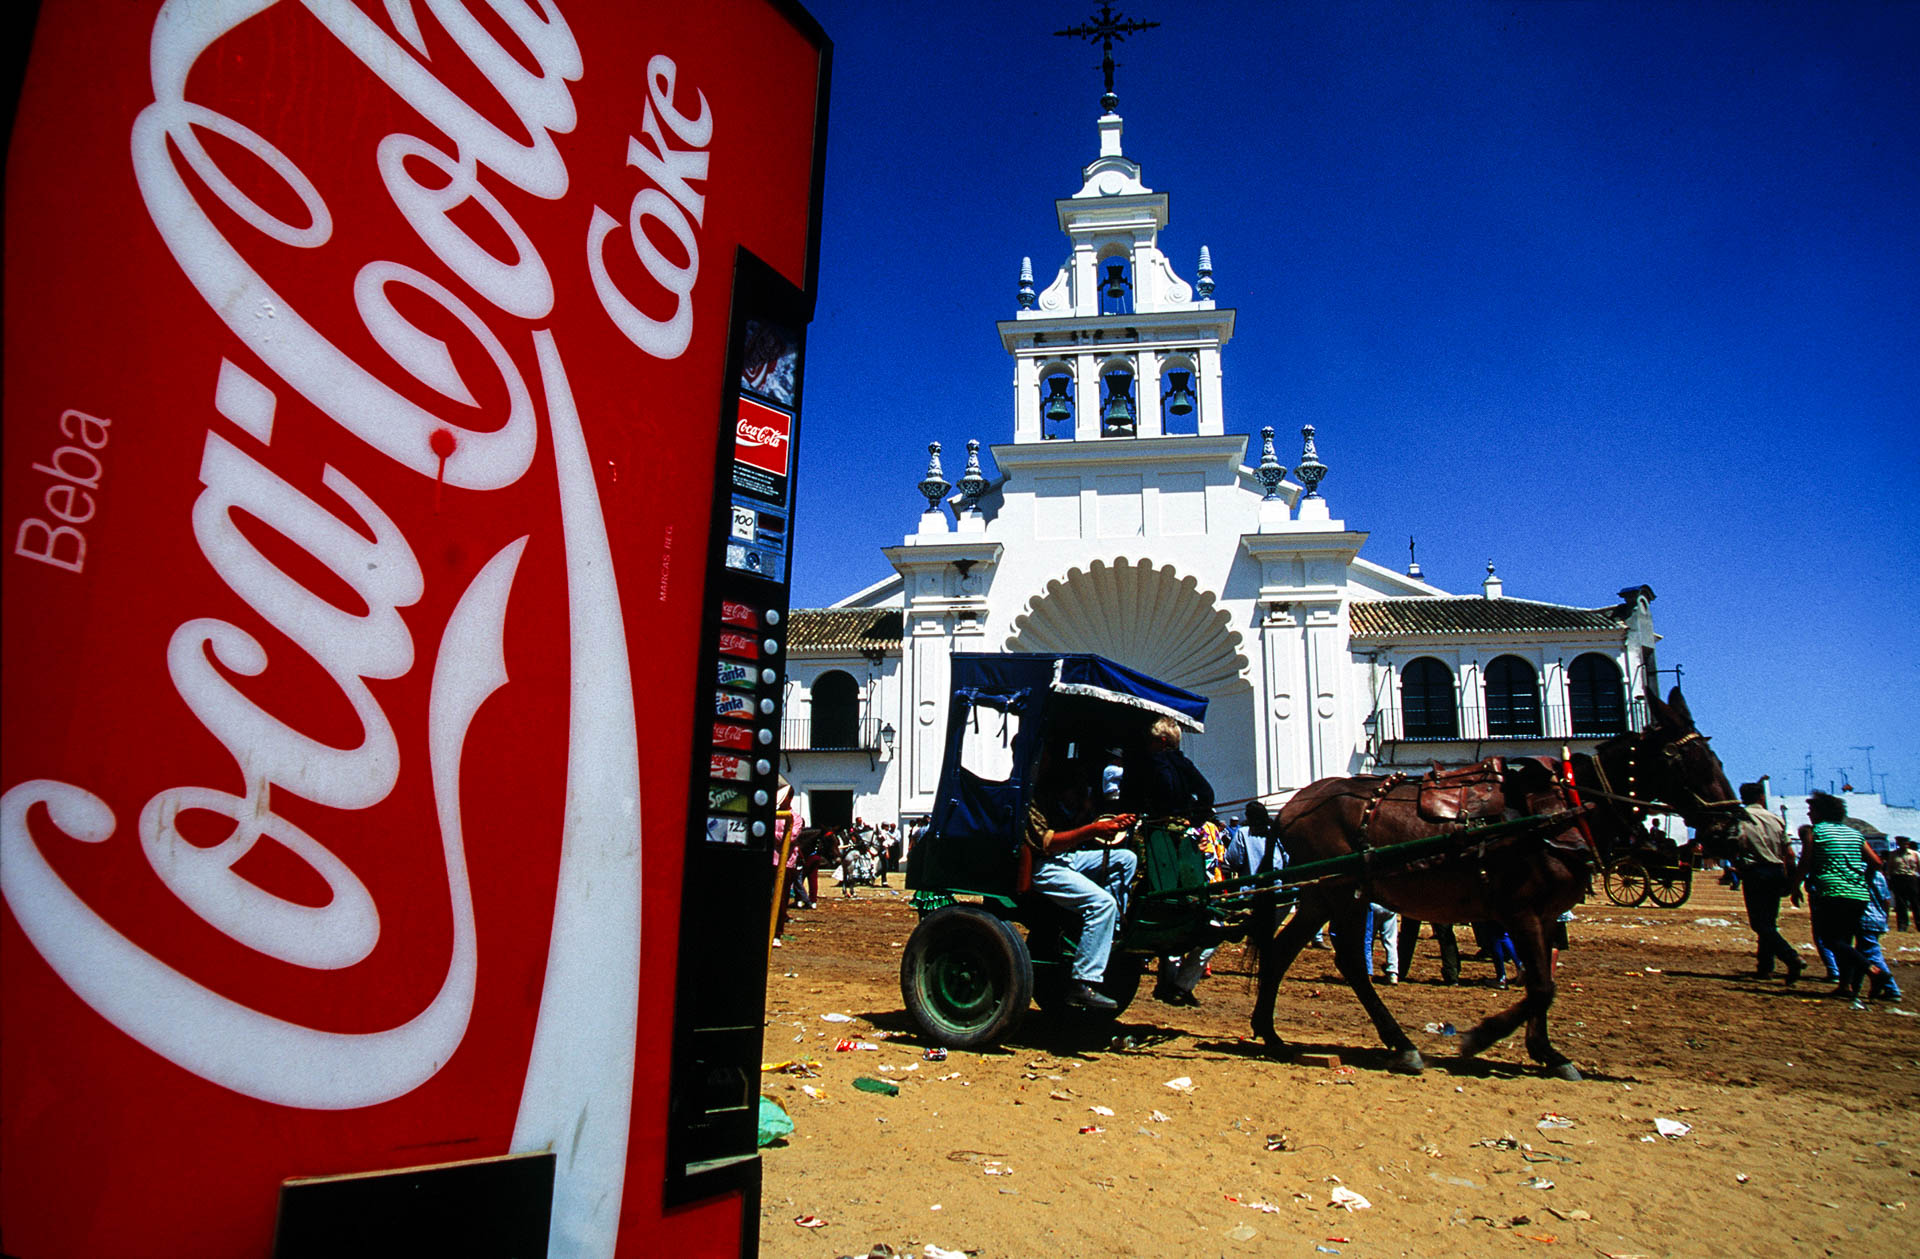  The miracle around the world:&nbsp;El Rocio, a Coca-Cola distributer in front of the sanctuary. 